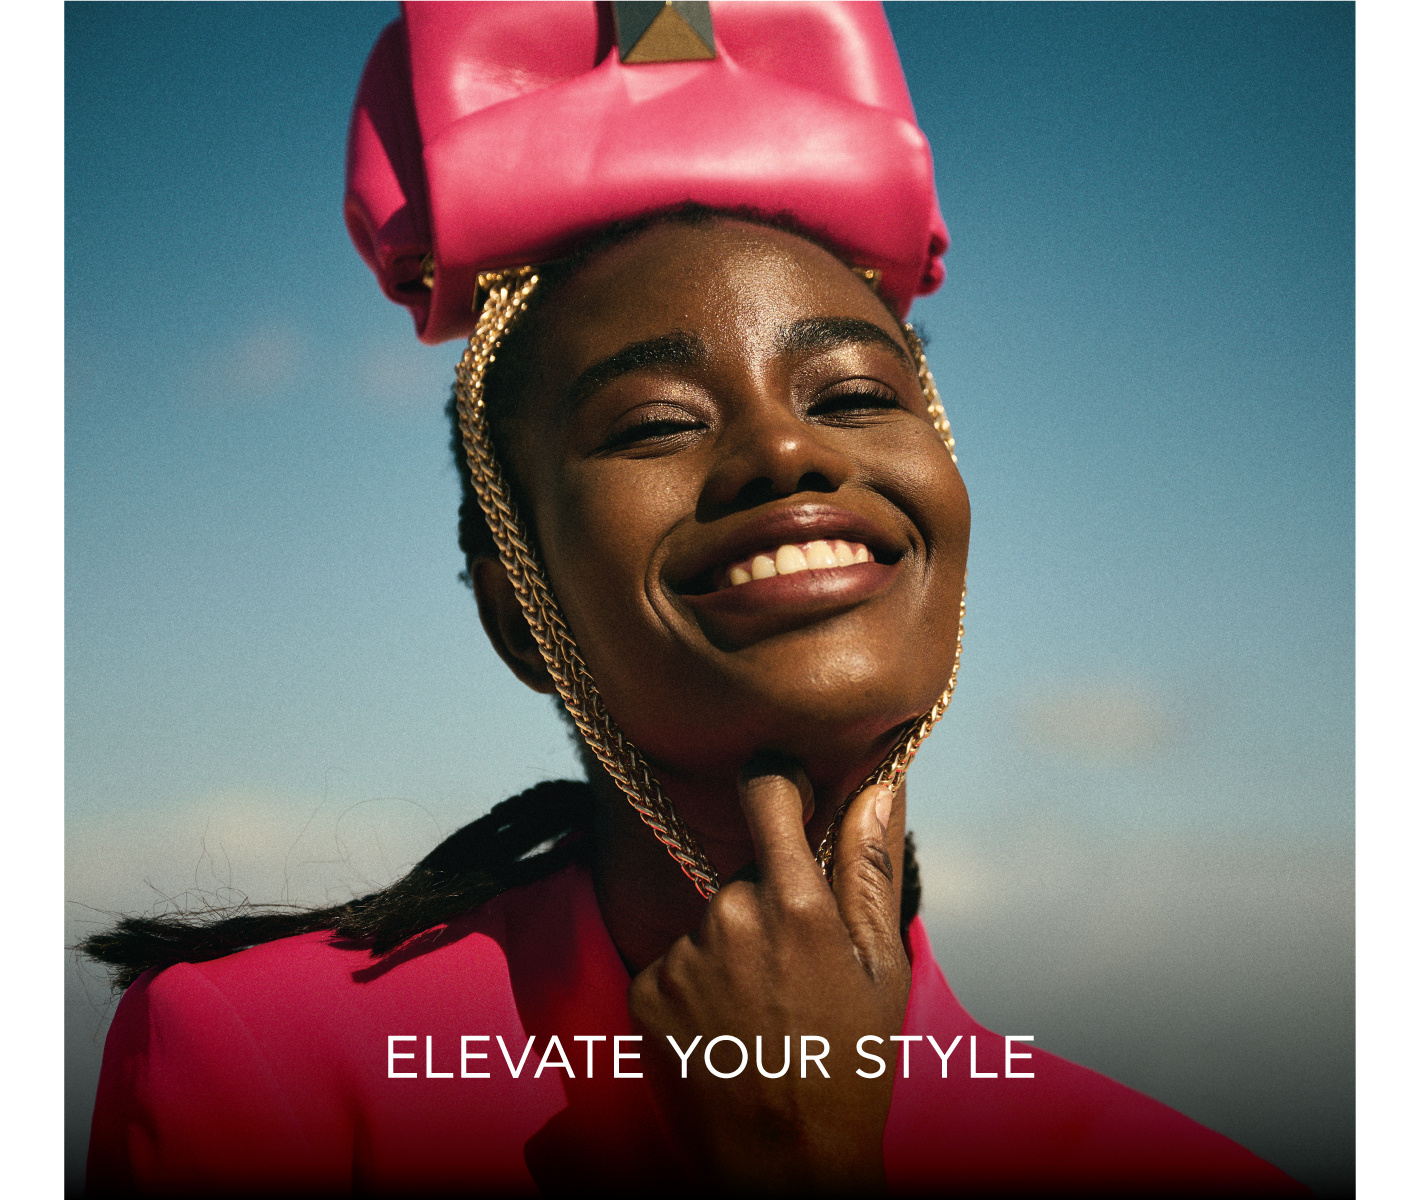 ELEVATE YOUR STYLE